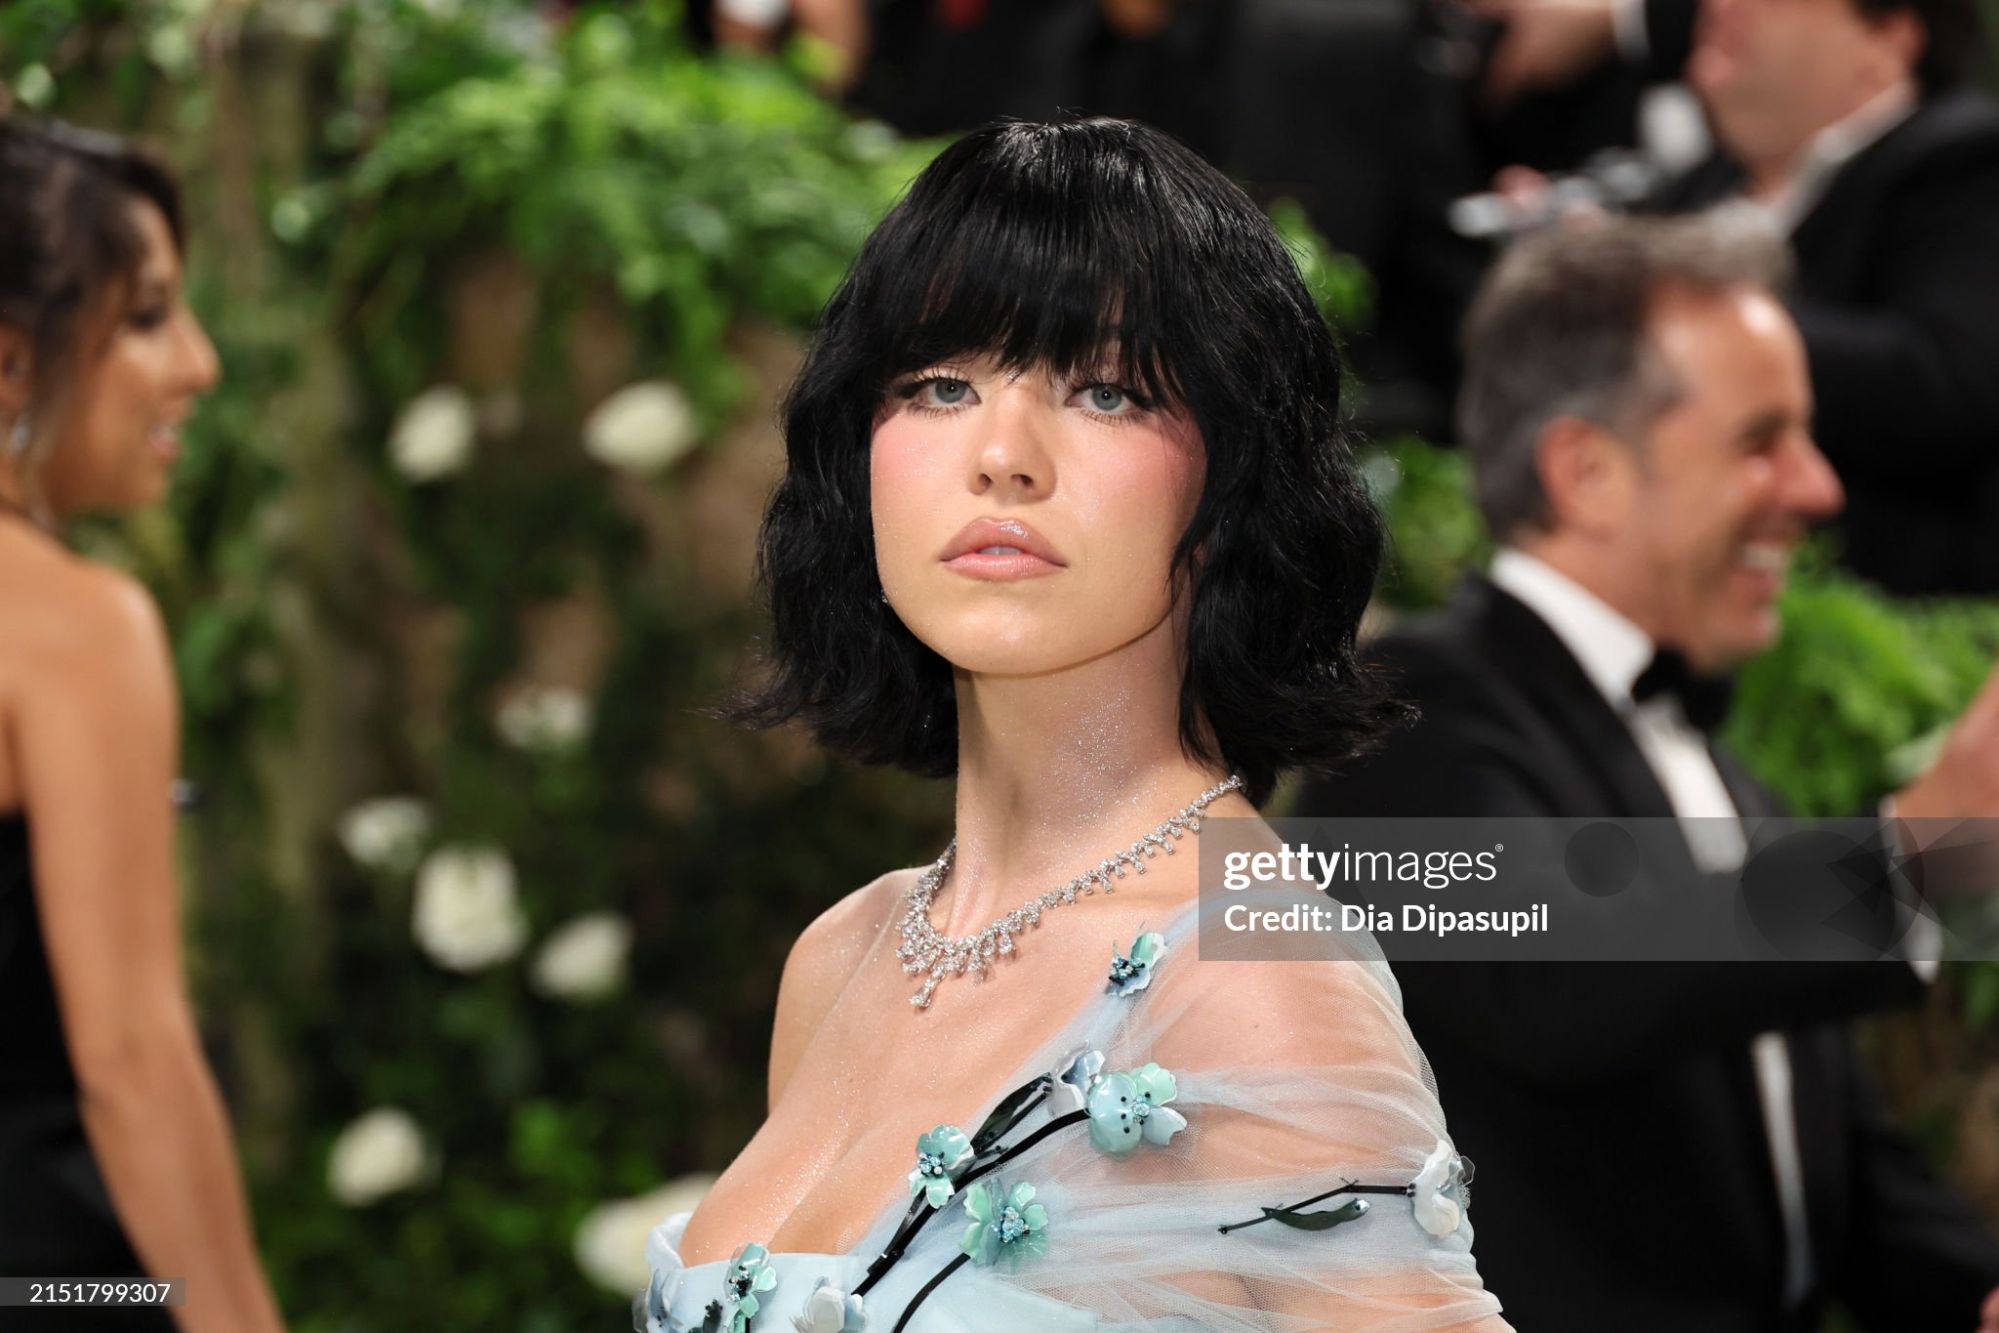 gettyimages-2151799307-2048x2048.jpg